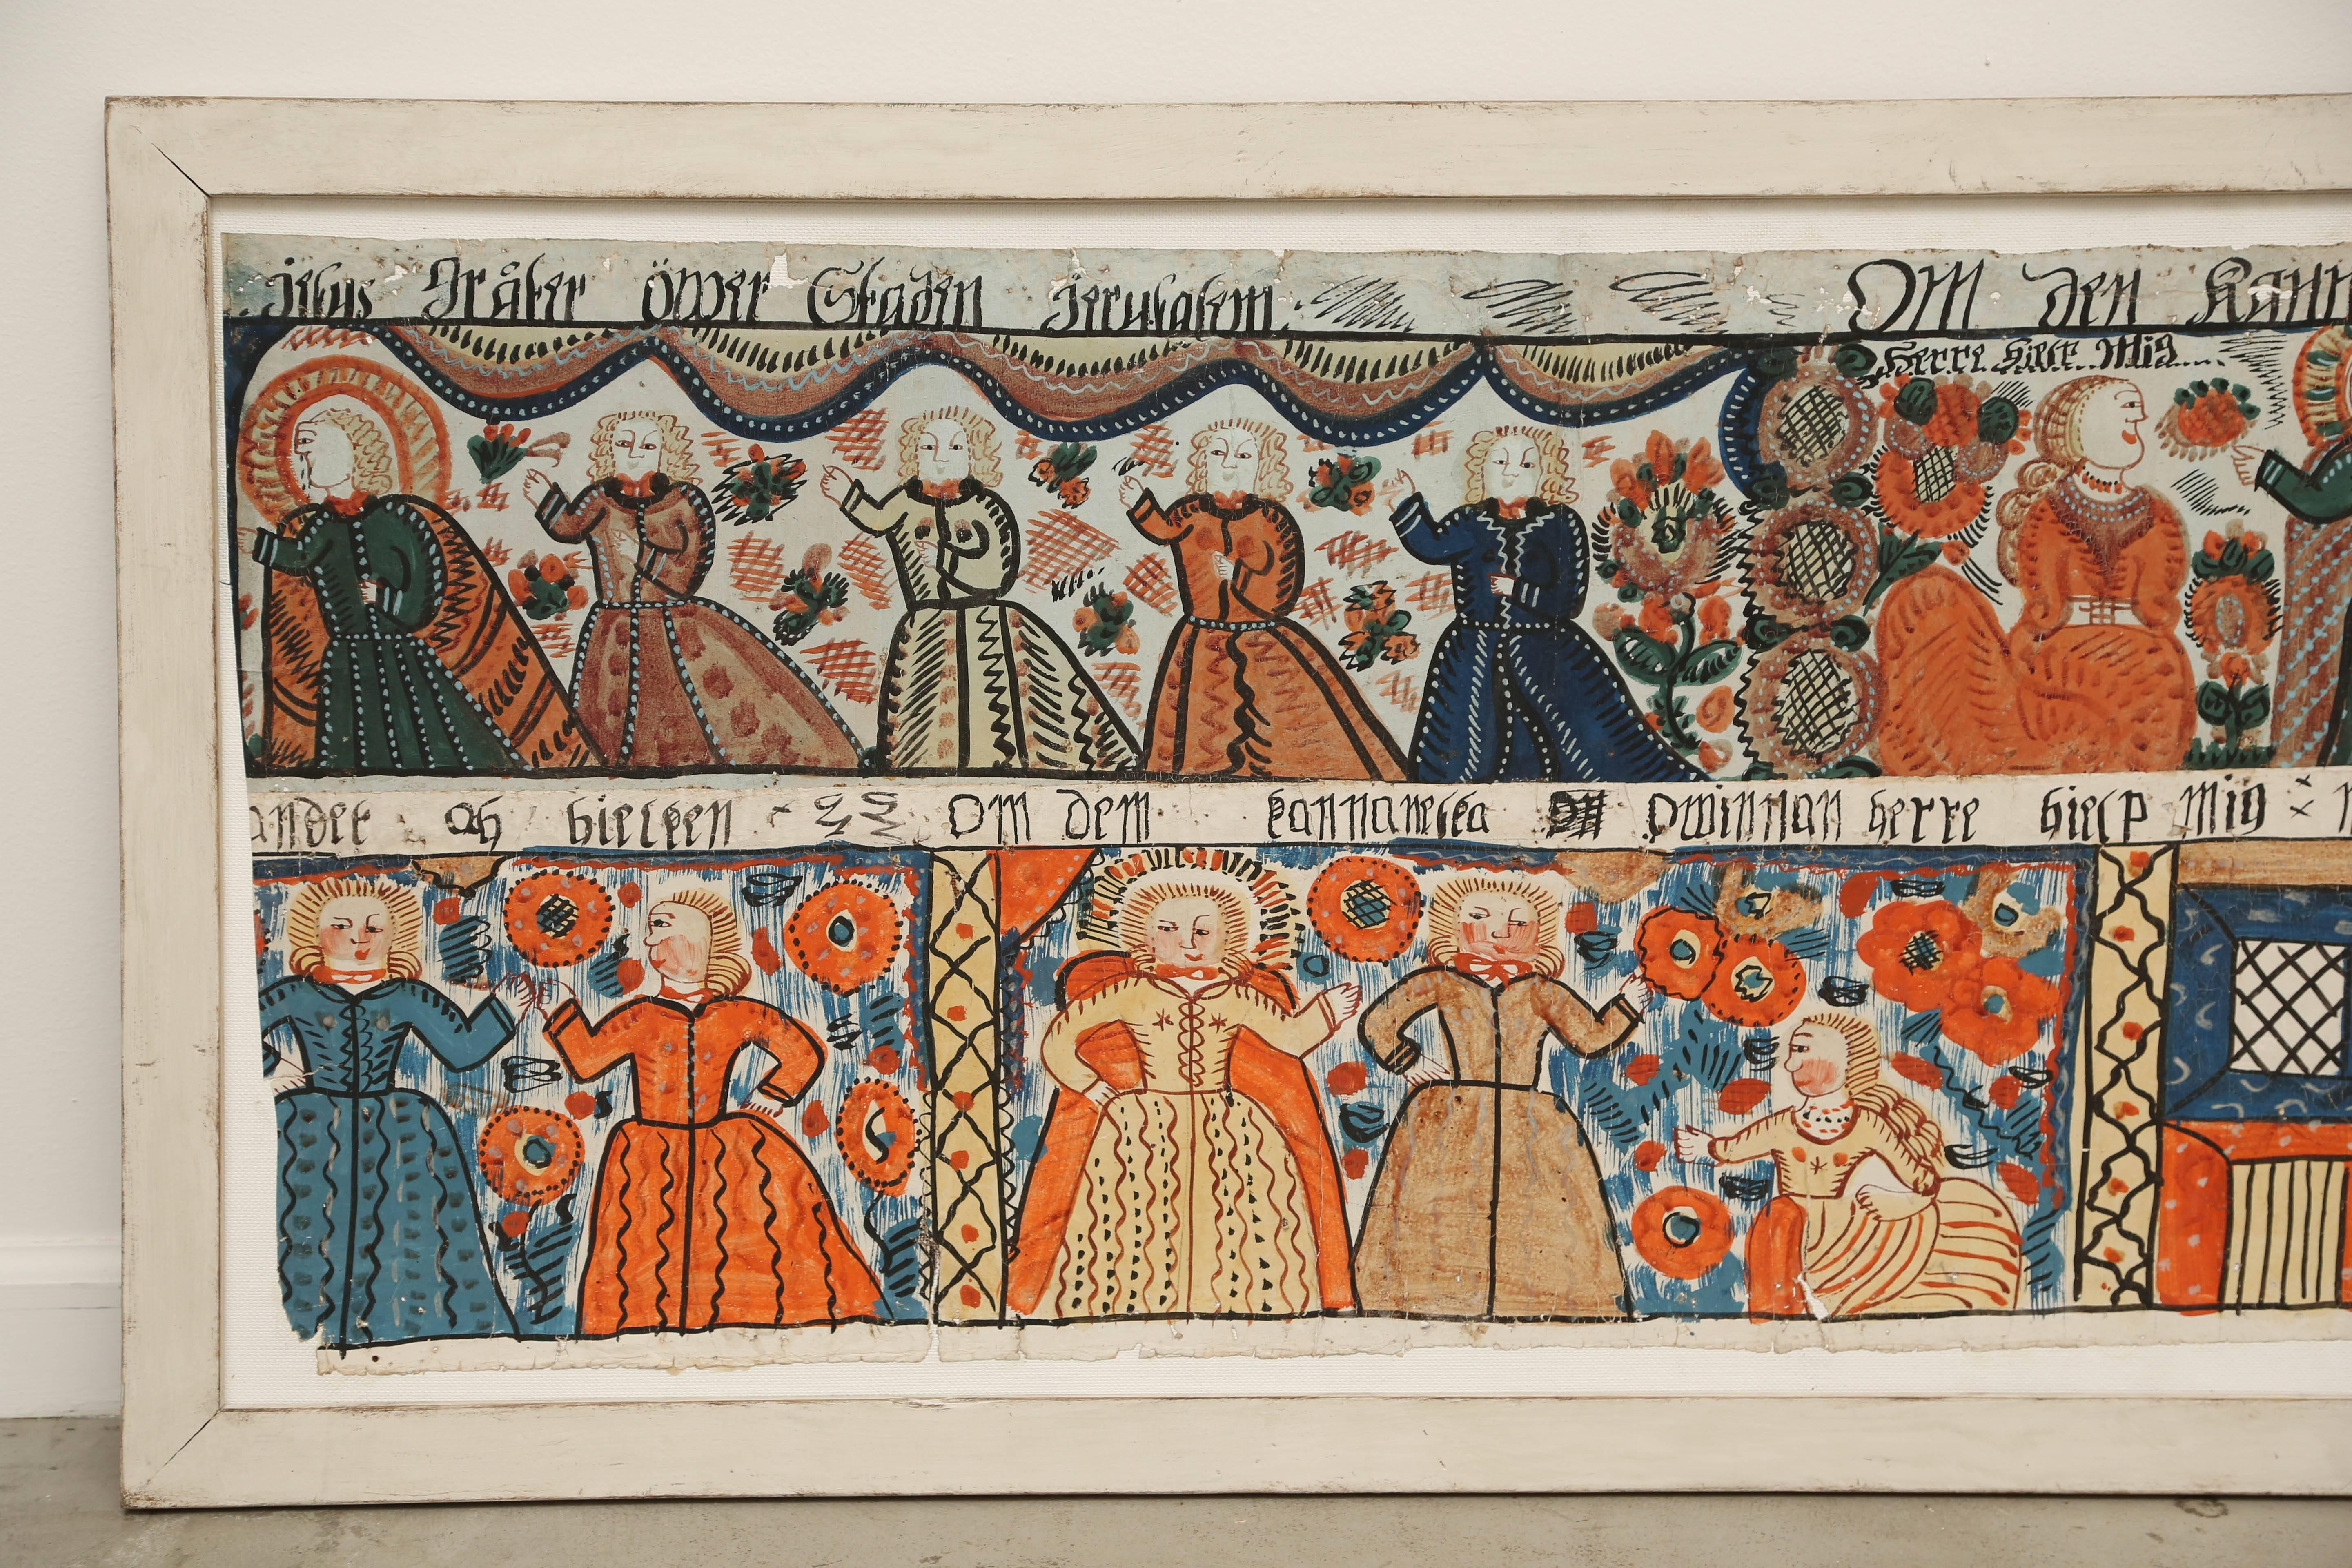 Wonderfully colorful scene of female figures dressed in full length gowns and the males in cloaks. They are dancing and celebrating.
From Småland closed to Vaxjø, Sweden.
The panel easily adds color to any space and would also make an interesting